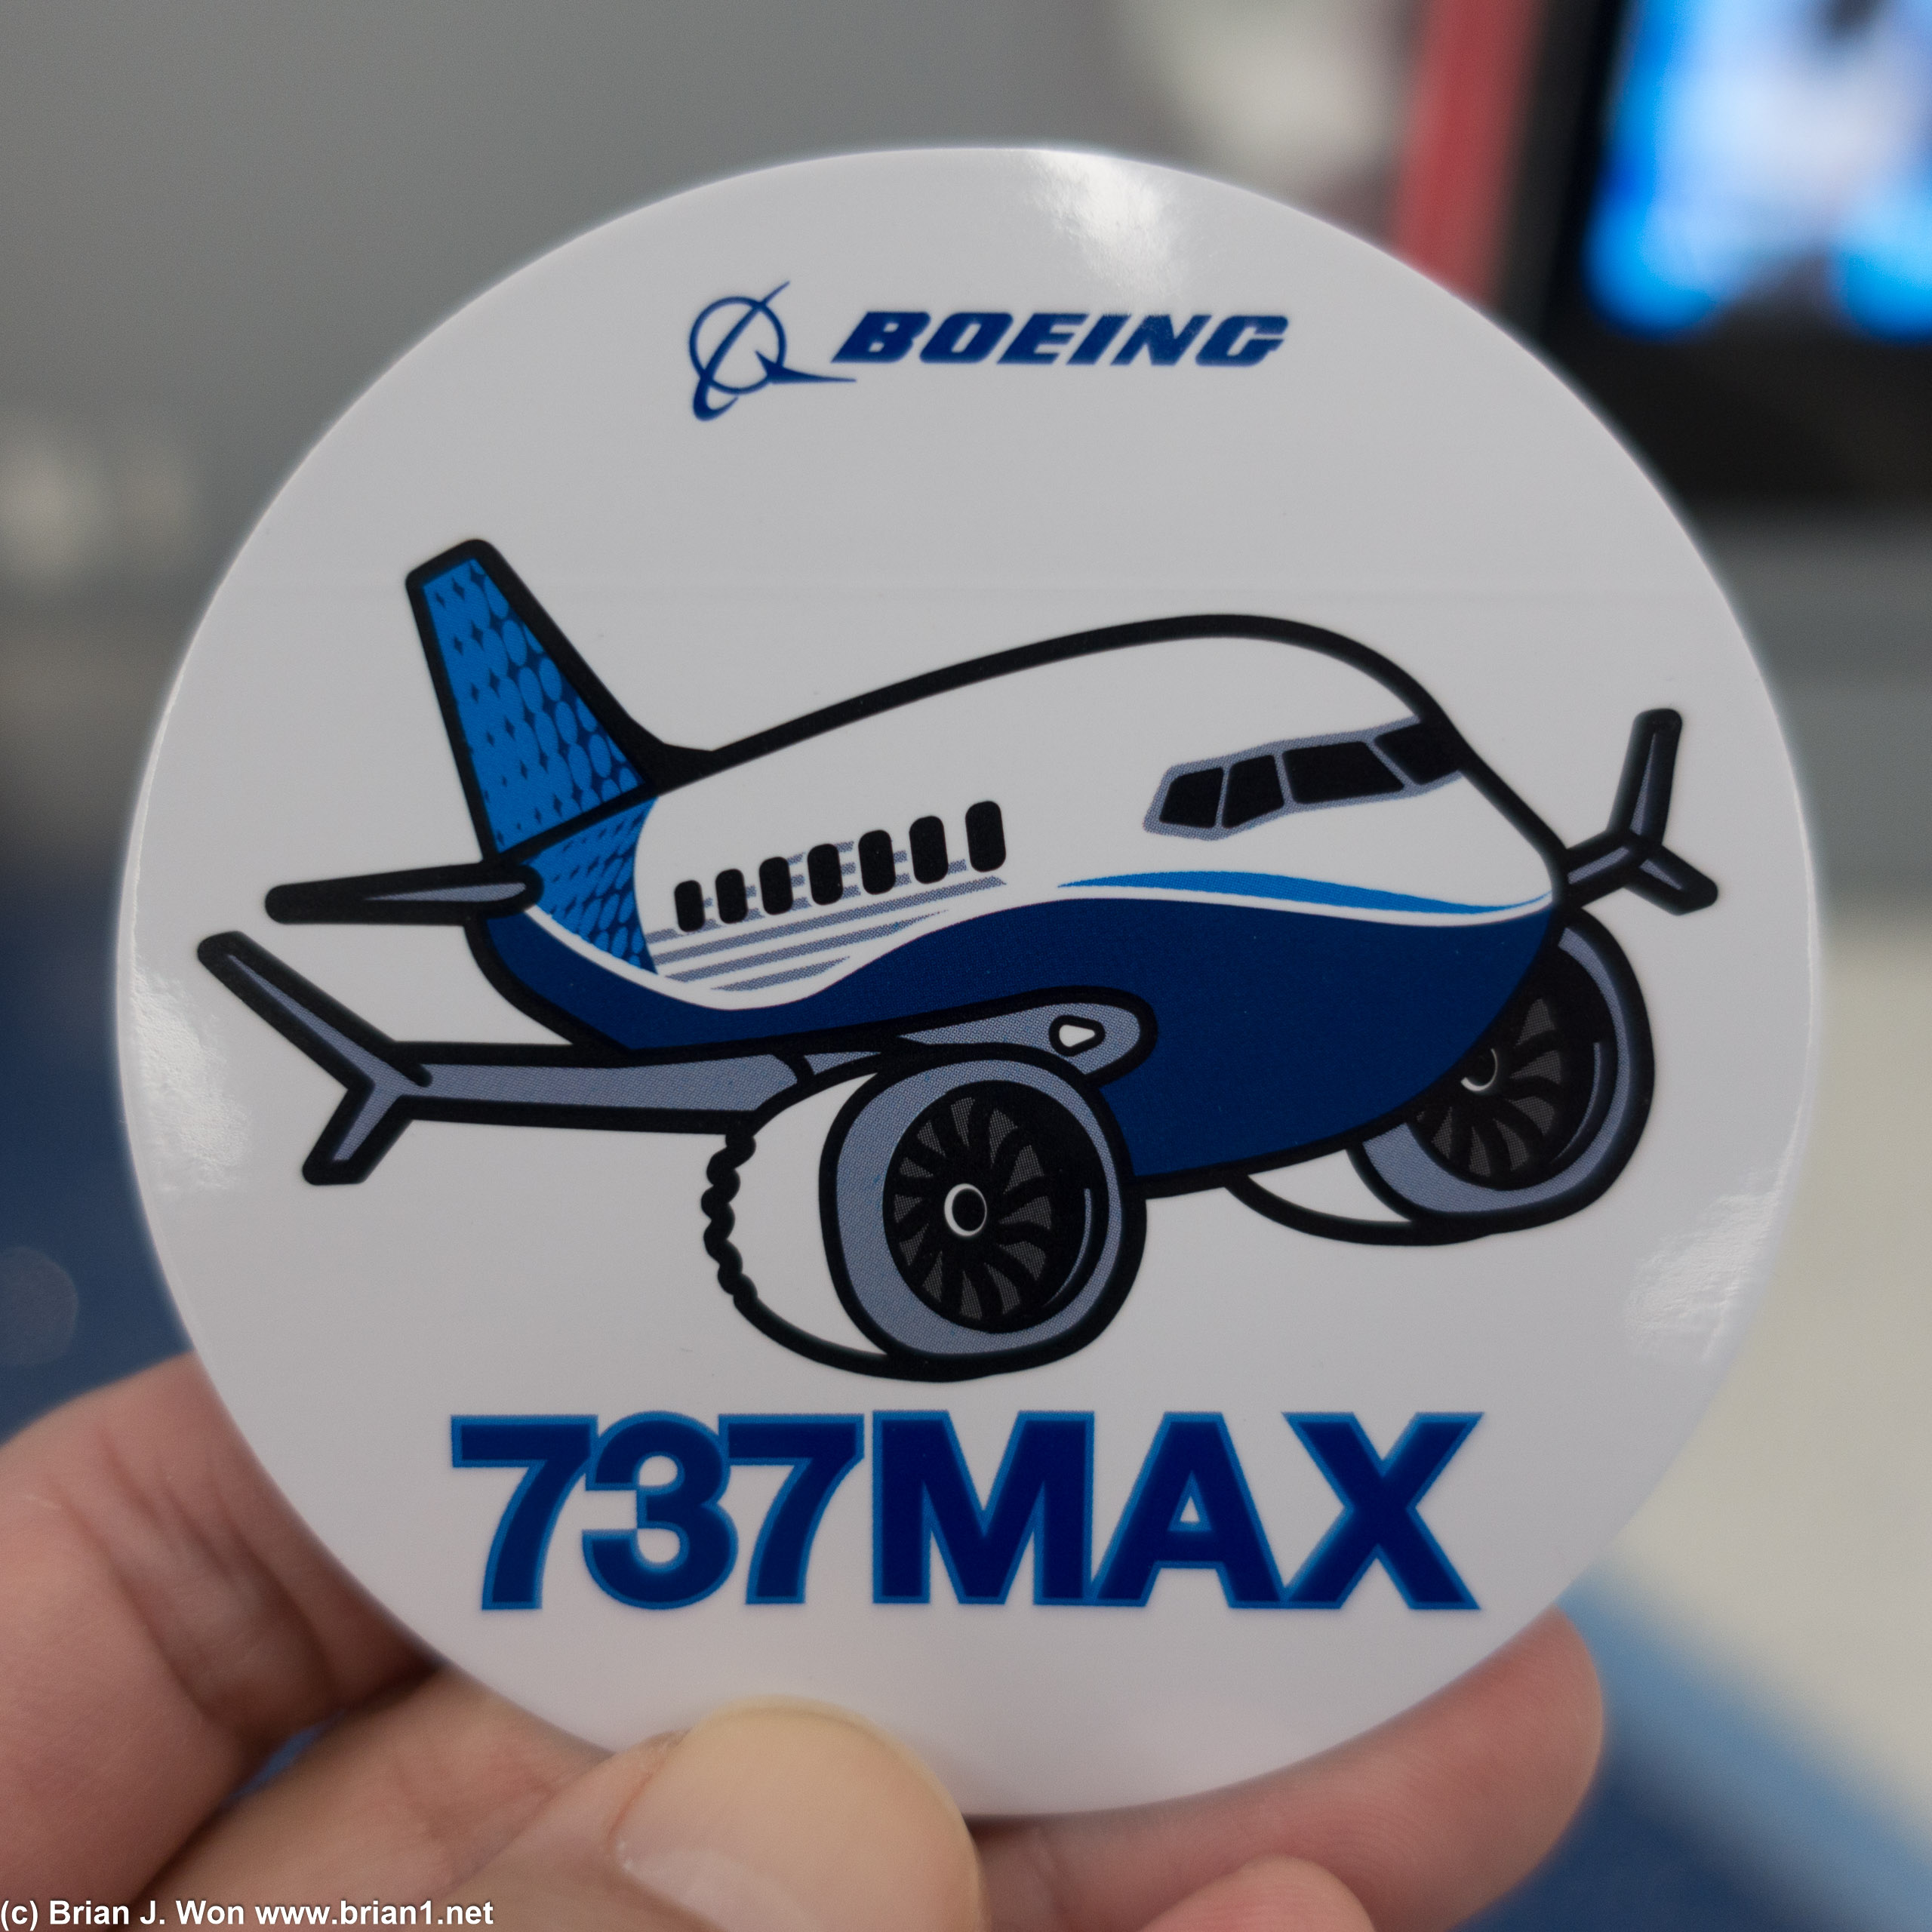 Got this from a Boeing employee on the flight.